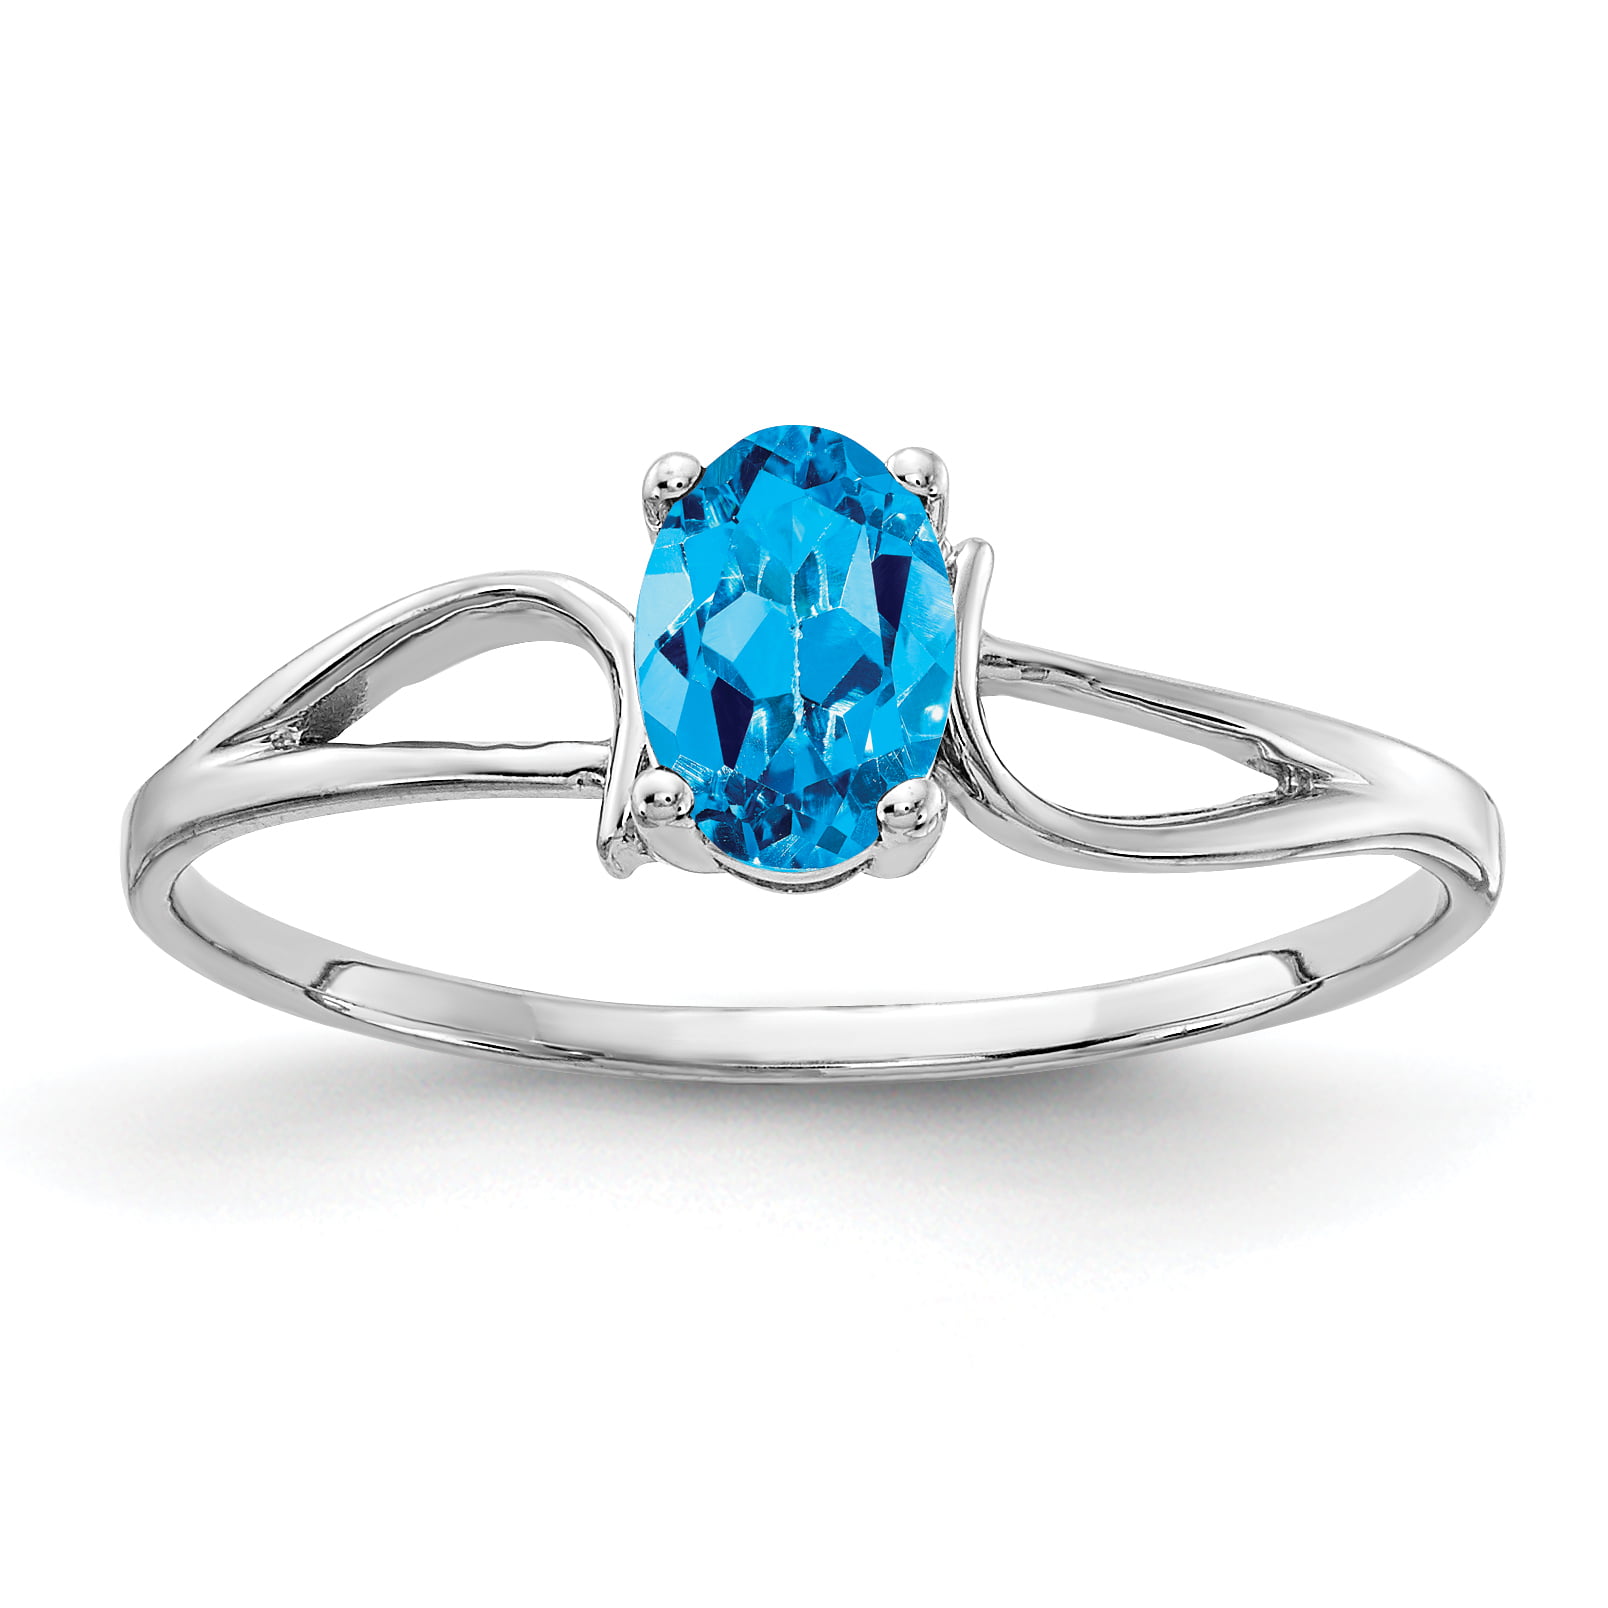 Online Only Exclusive Moon Design Blue Topaz Ring – Super Silver